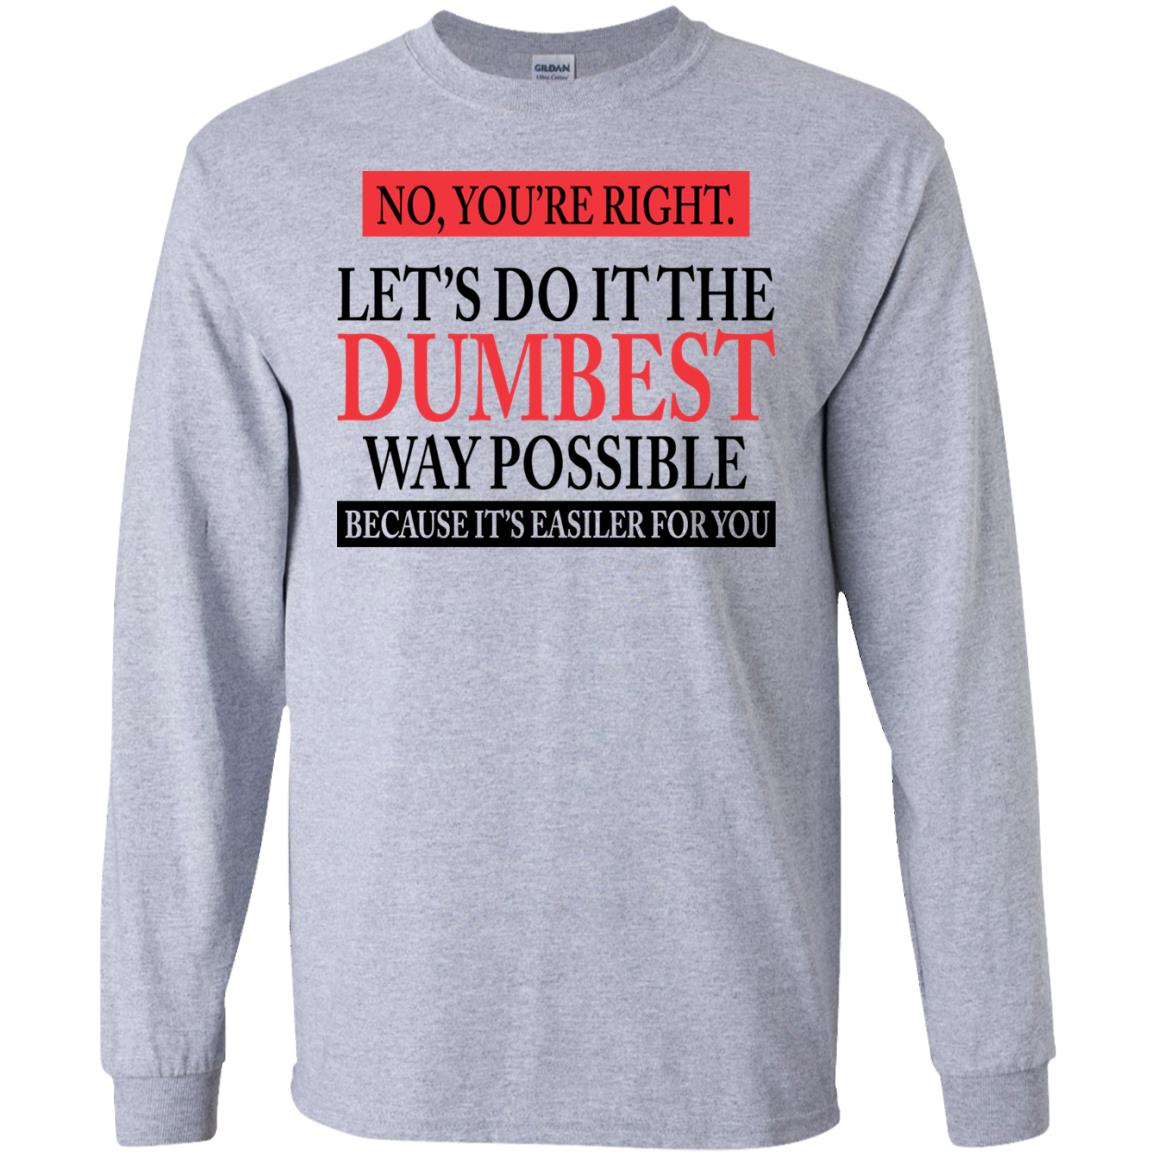 Let's Do It The Dumbest Way Possible Shirt | Allbluetees.com